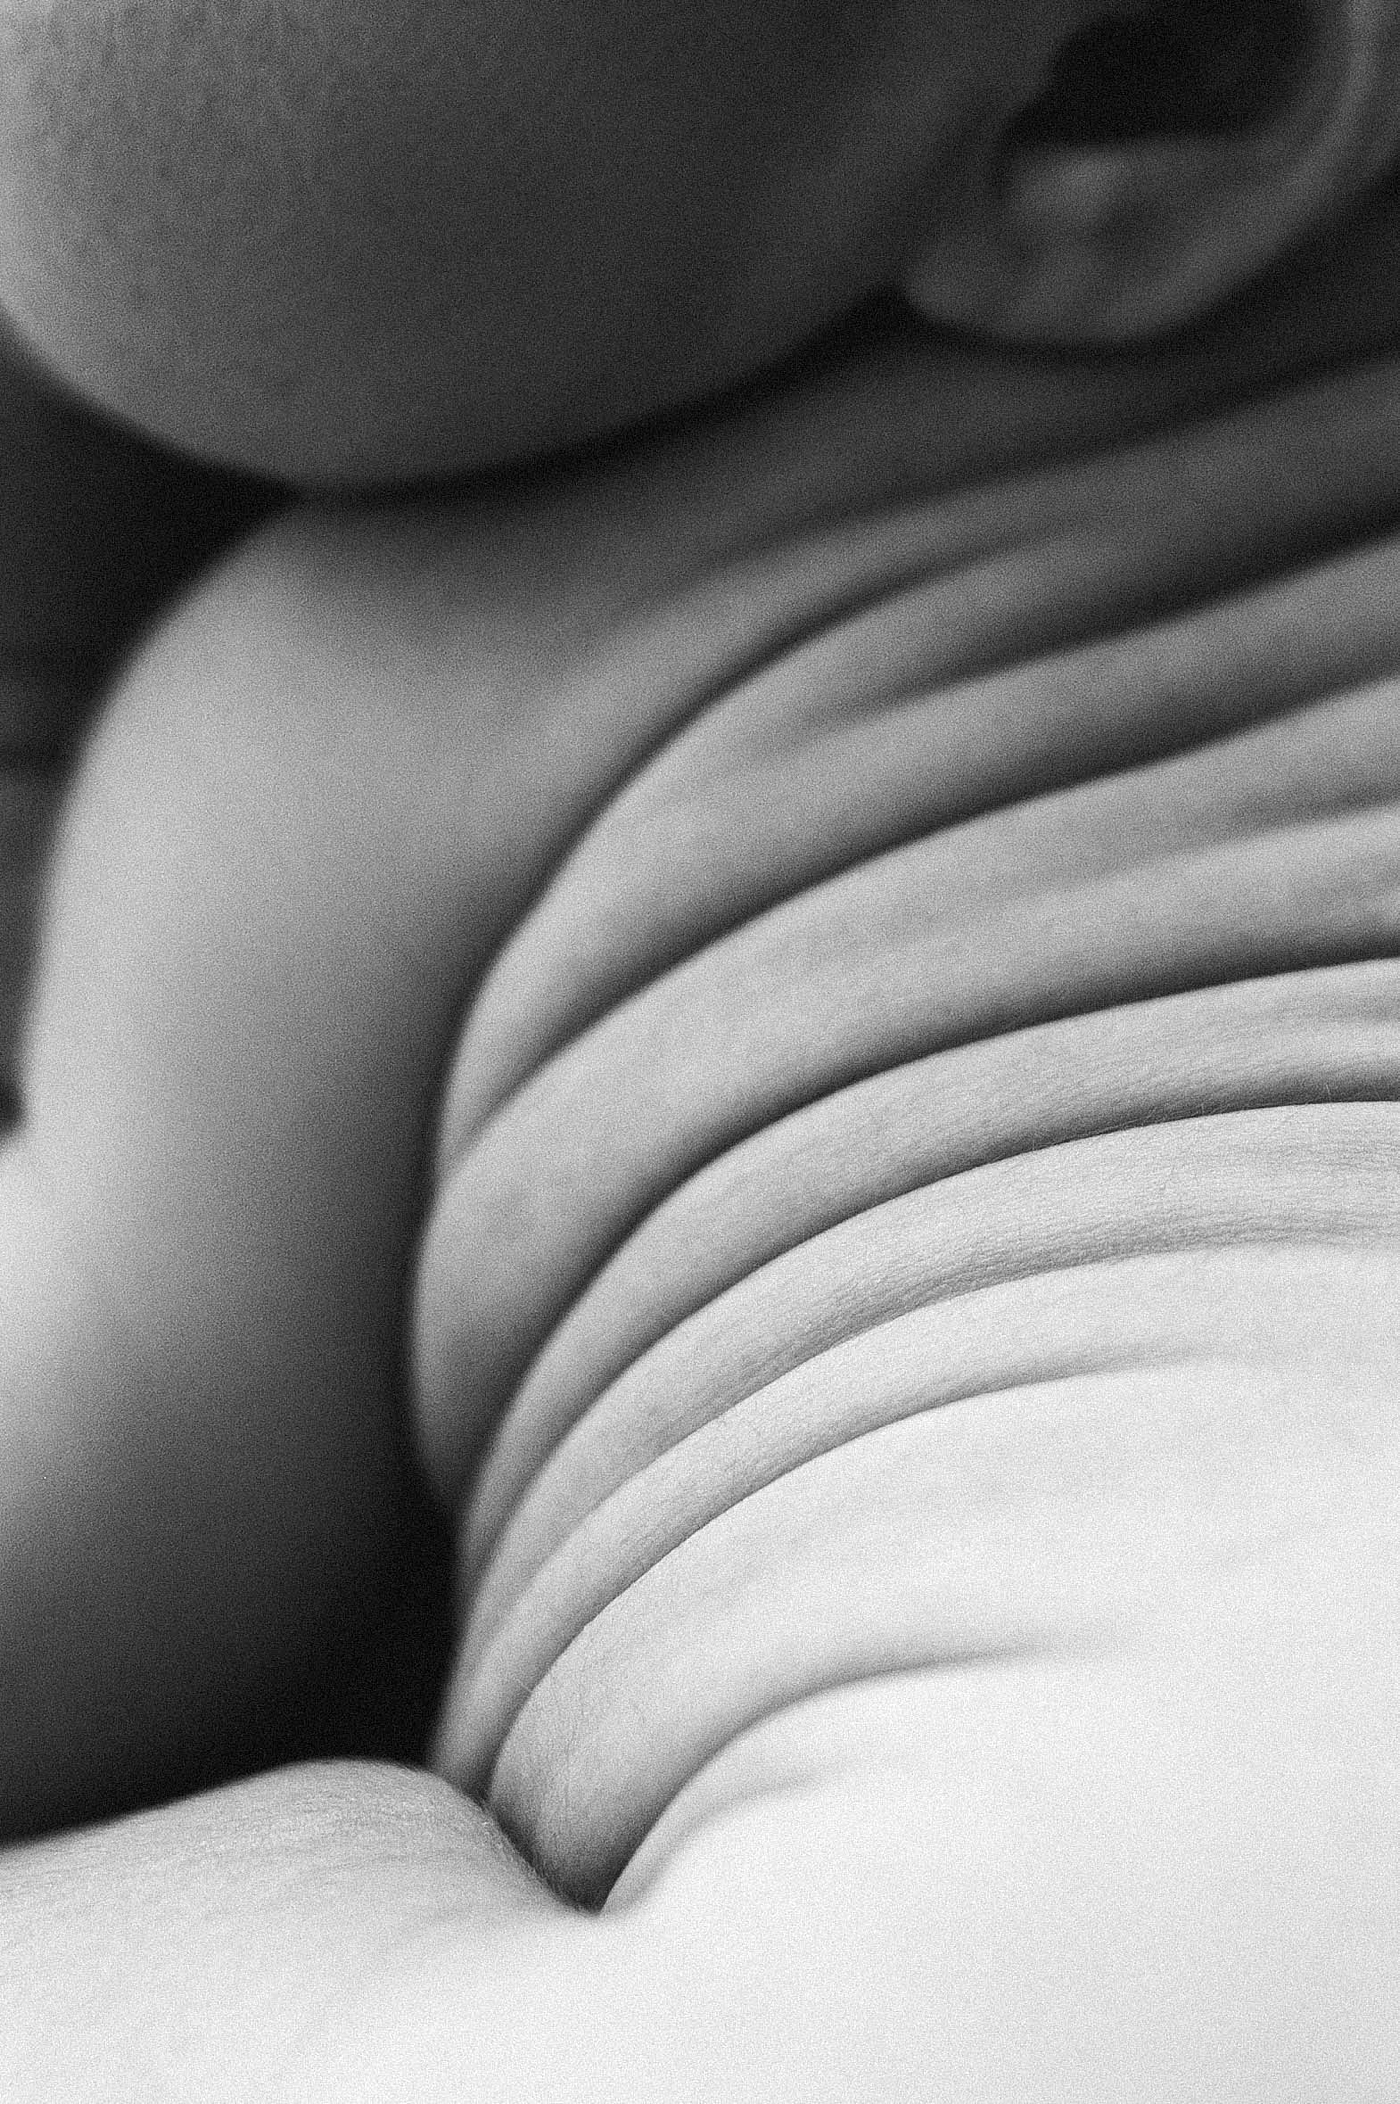 Detail shot of baby rolls on back during Gig Harbor newborn session. Photo by Meg Newton Photography.